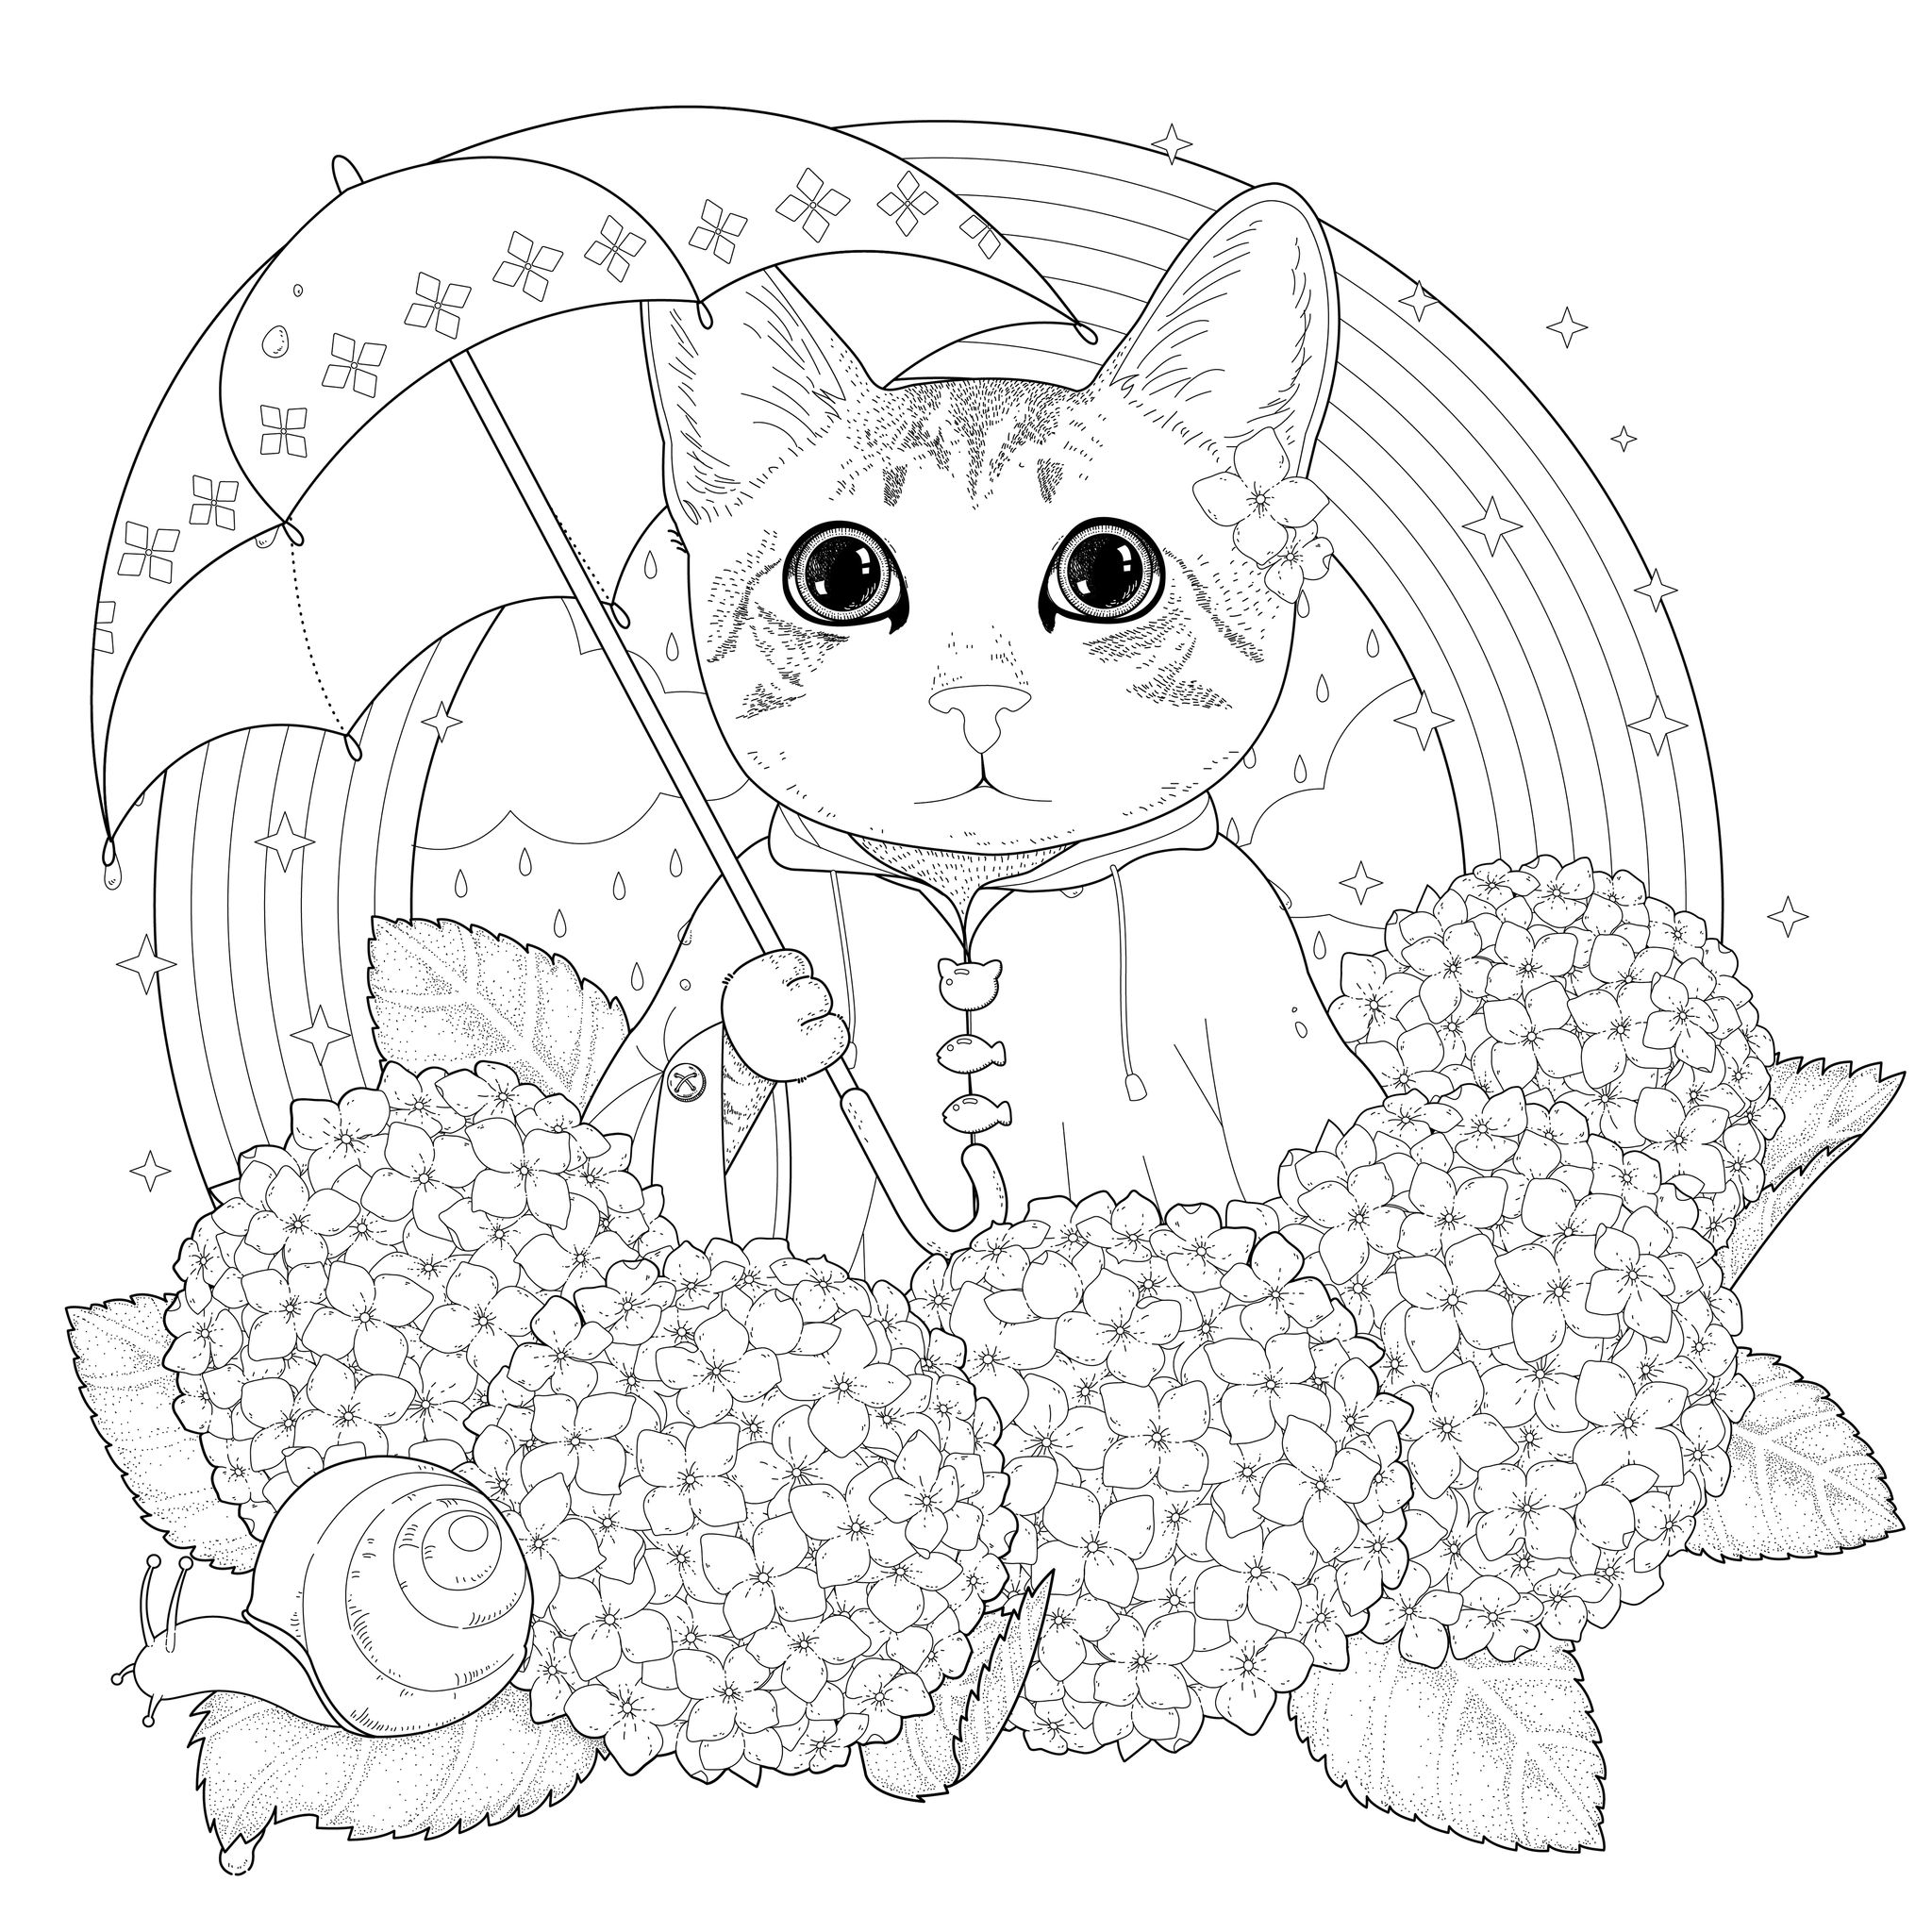 Adorable kitty coloring page in exquisite style, Artist : Kchung   Source : 123rf